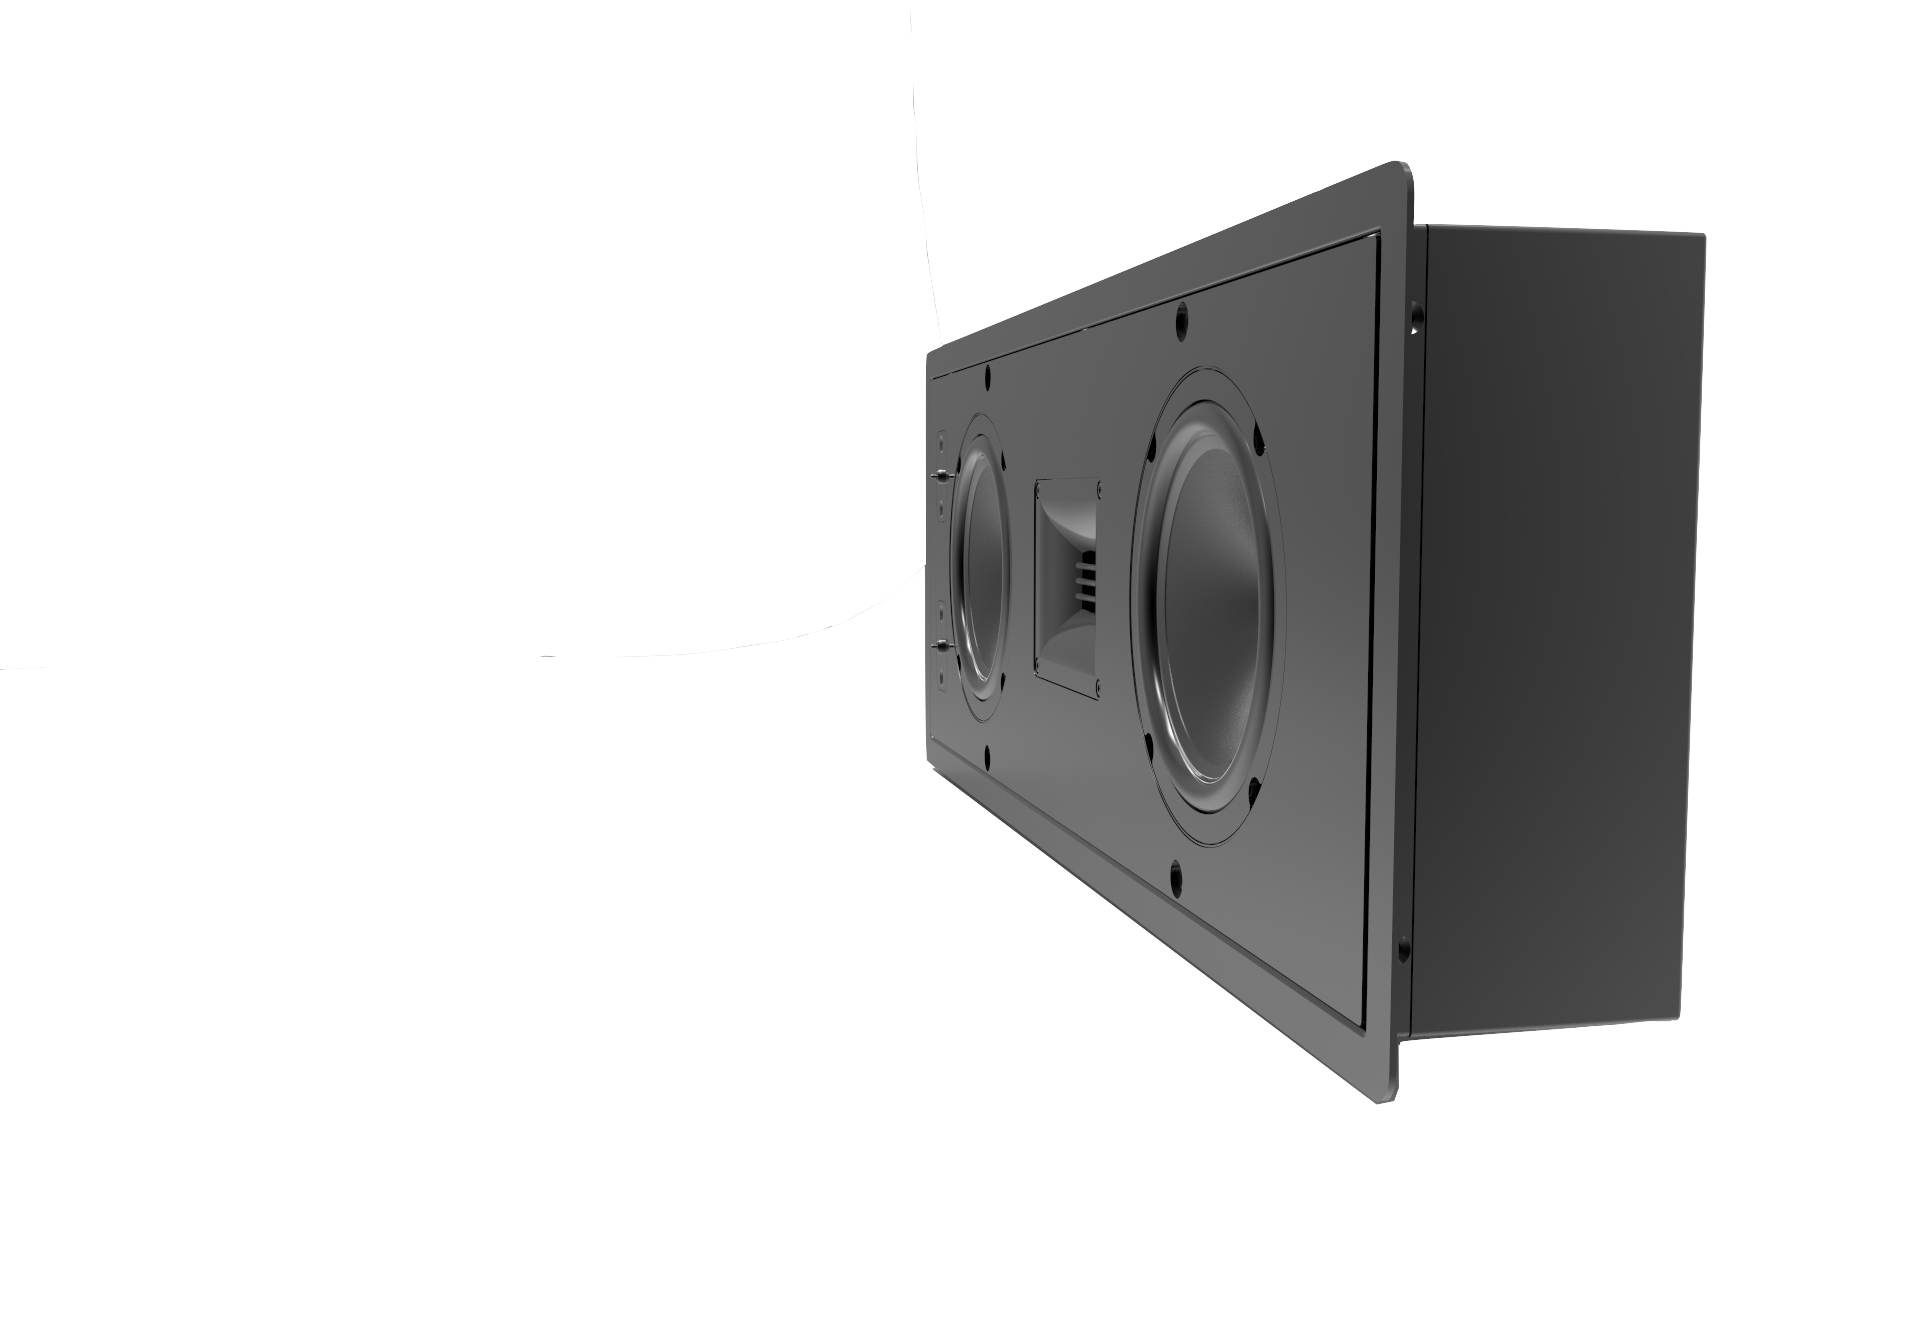 6.5 Inch Home Theater on-Wall Speaker